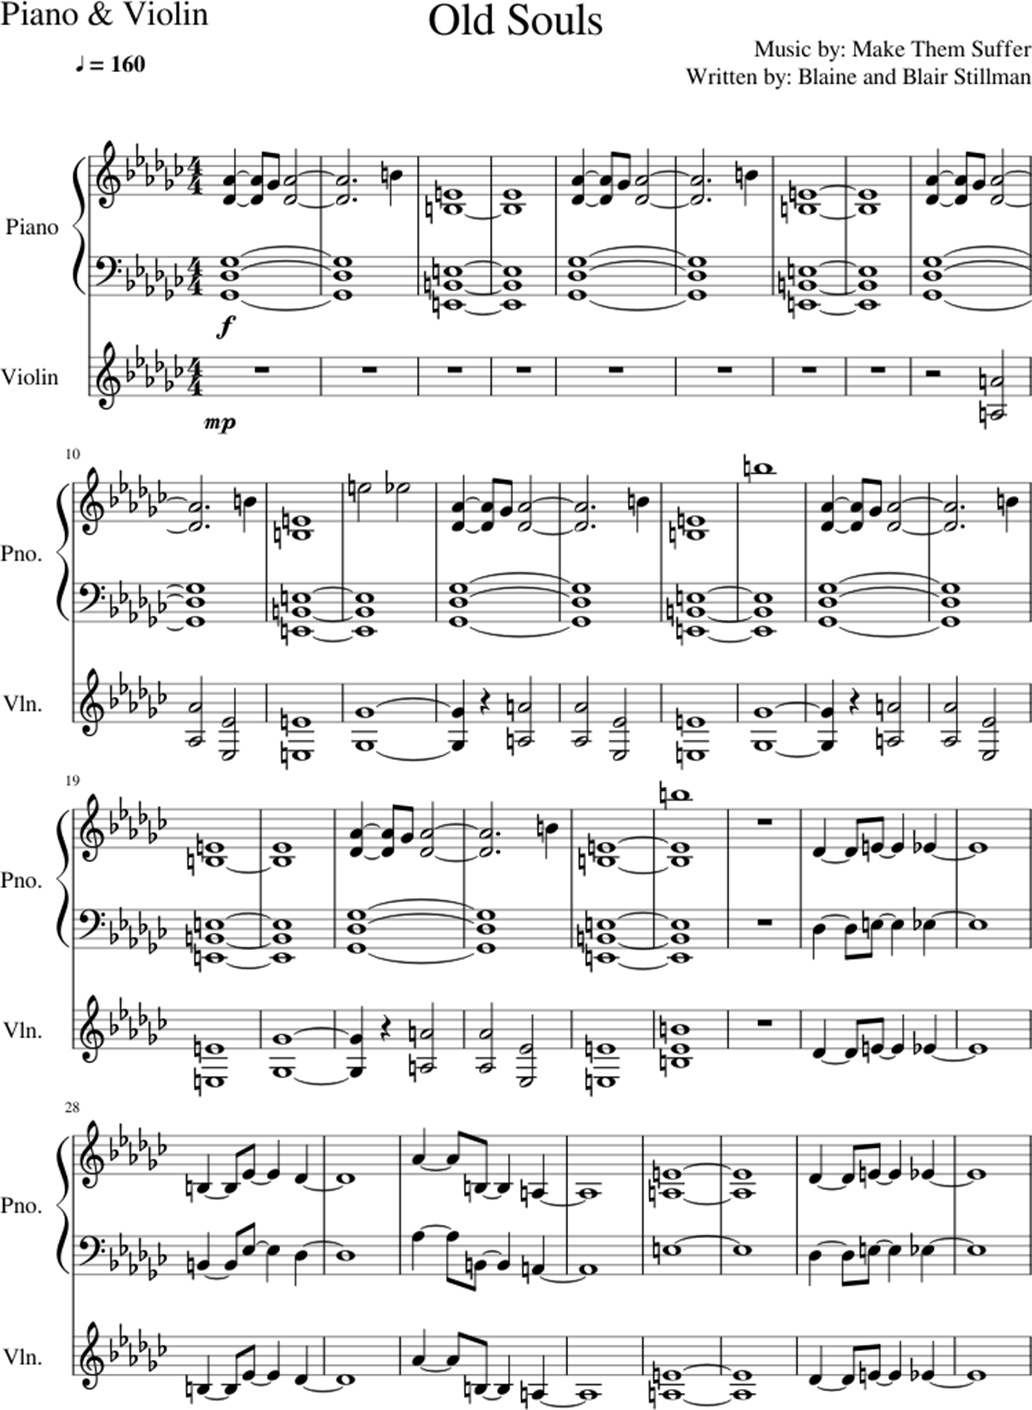 Old Souls sheet music notes 1